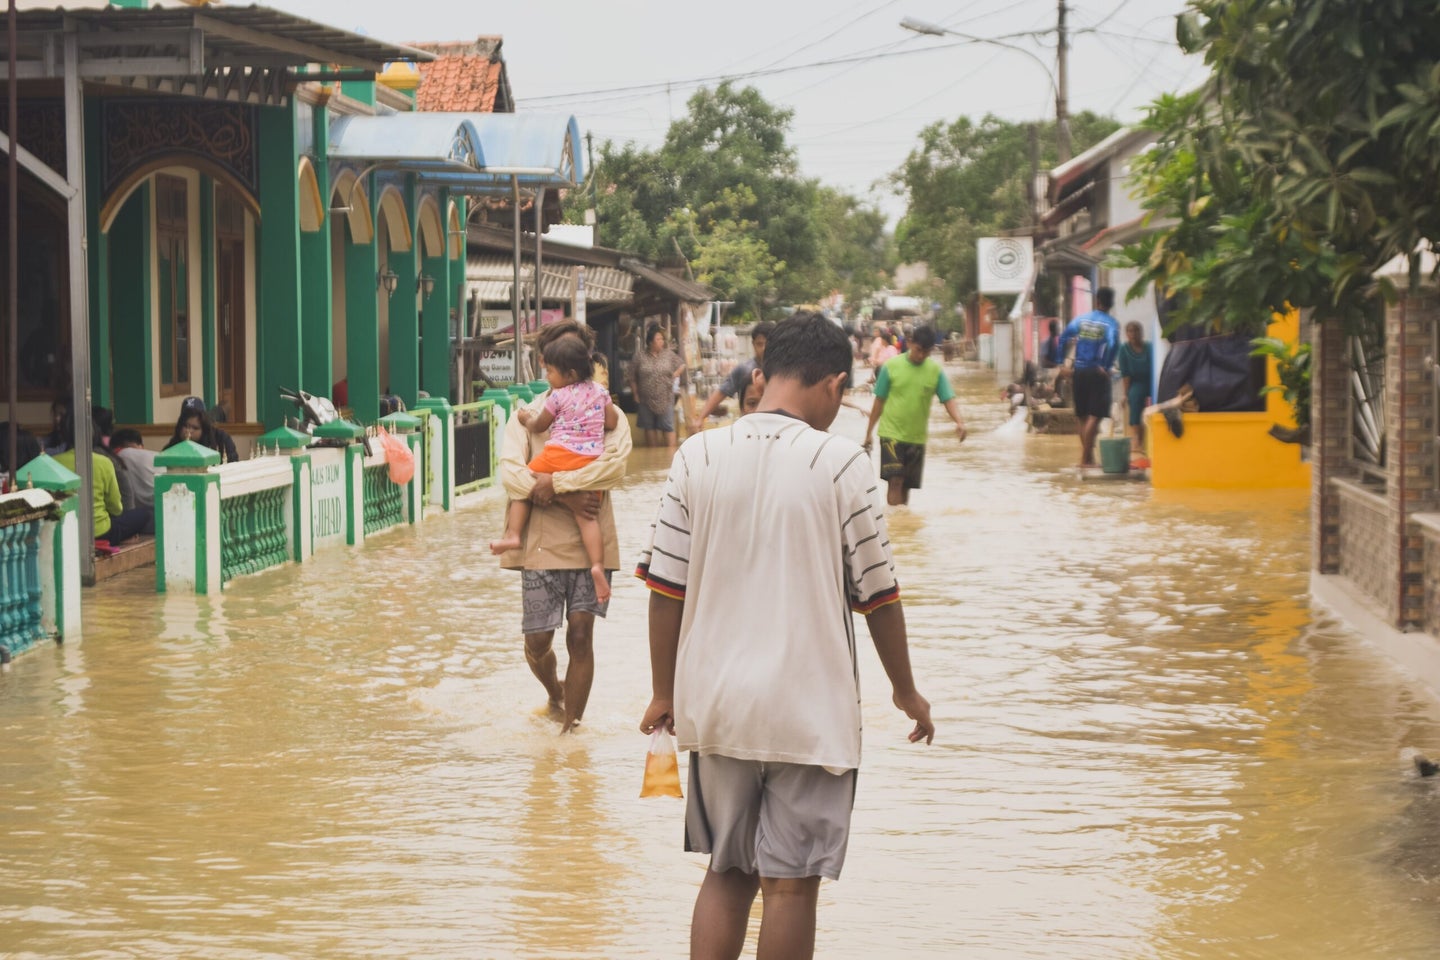 Flooded neighborhood in Bangladesh due to climate change and maladaptation